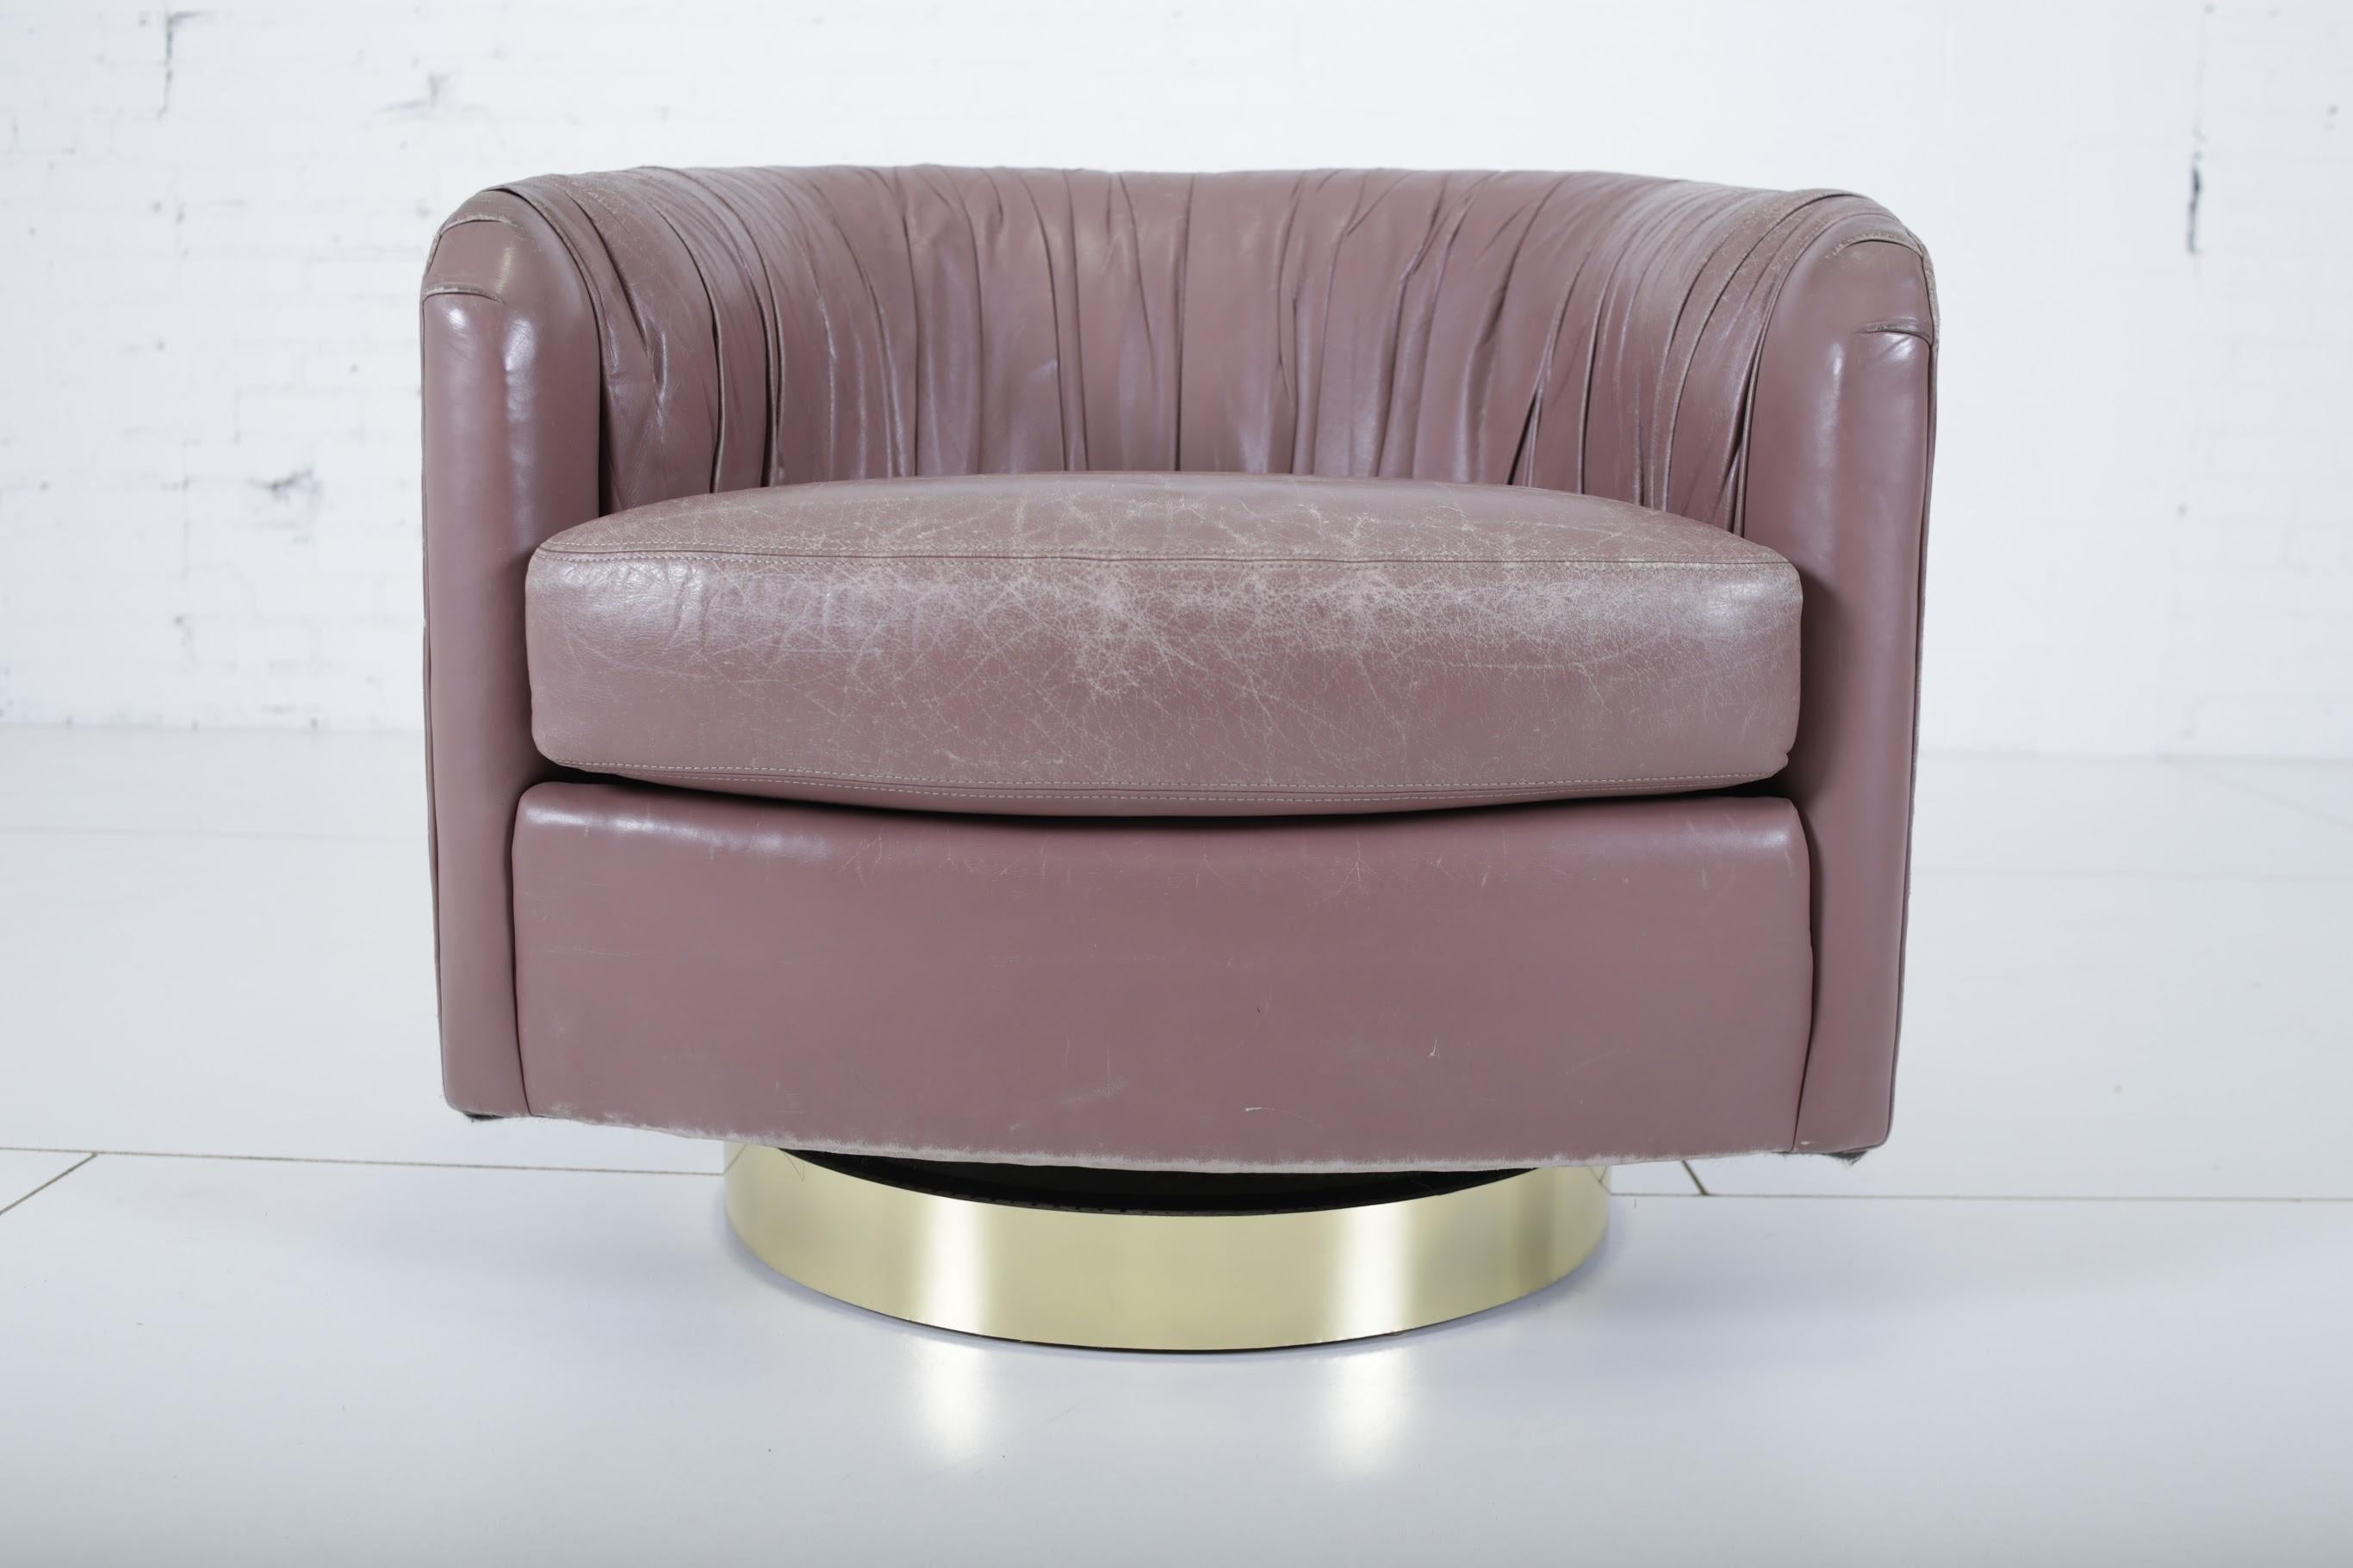 Swivel chair by Milo Baughman. Reupholstered in pleated leather in the 1980s. Least her is vintage and shows wear.